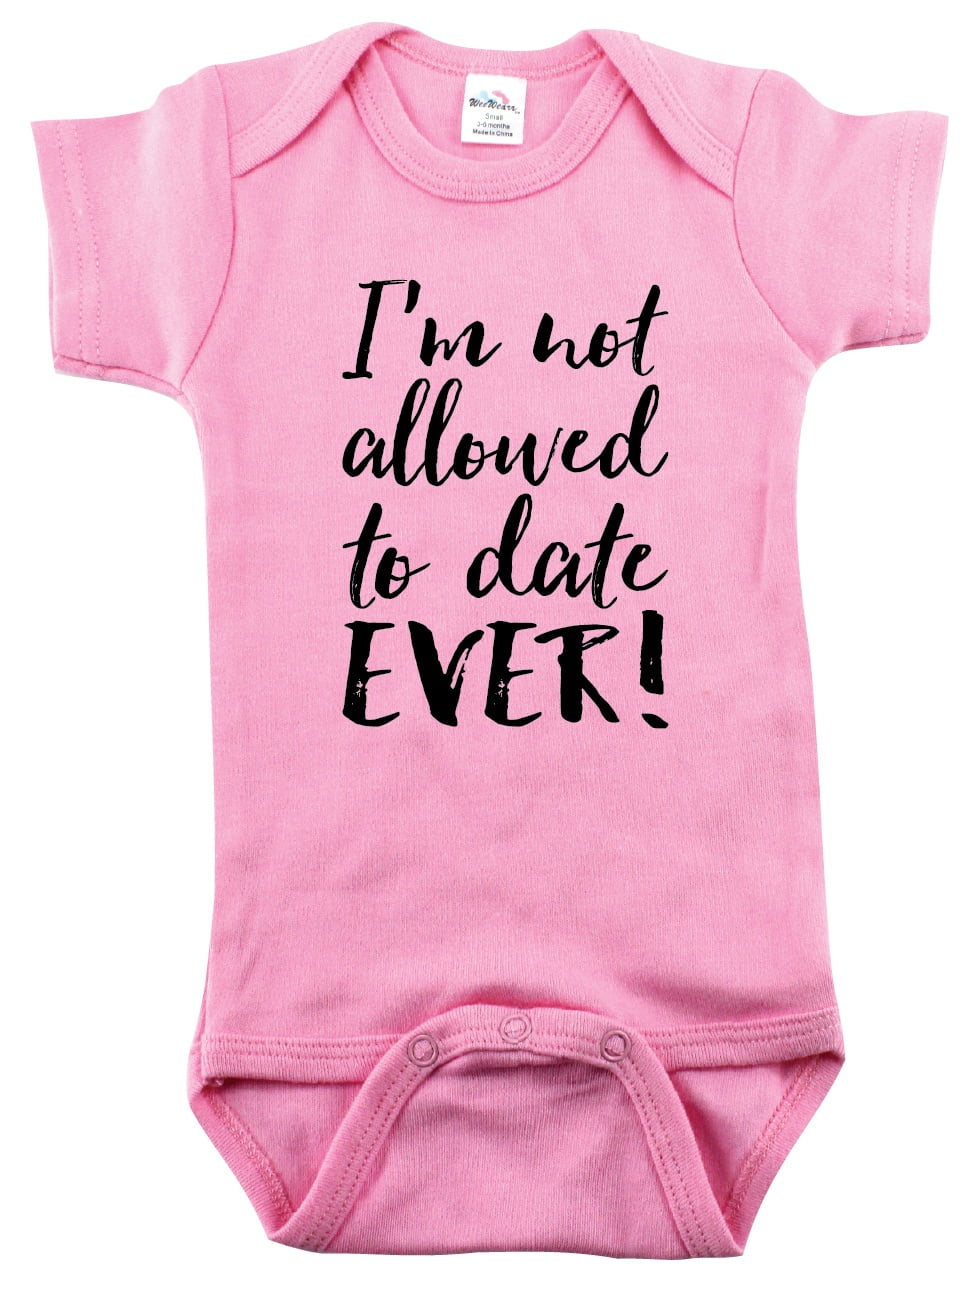 Not Allowed to Date, Cute Little Girl Bodysuit, Baby Girl Clothes, 0-3 ...